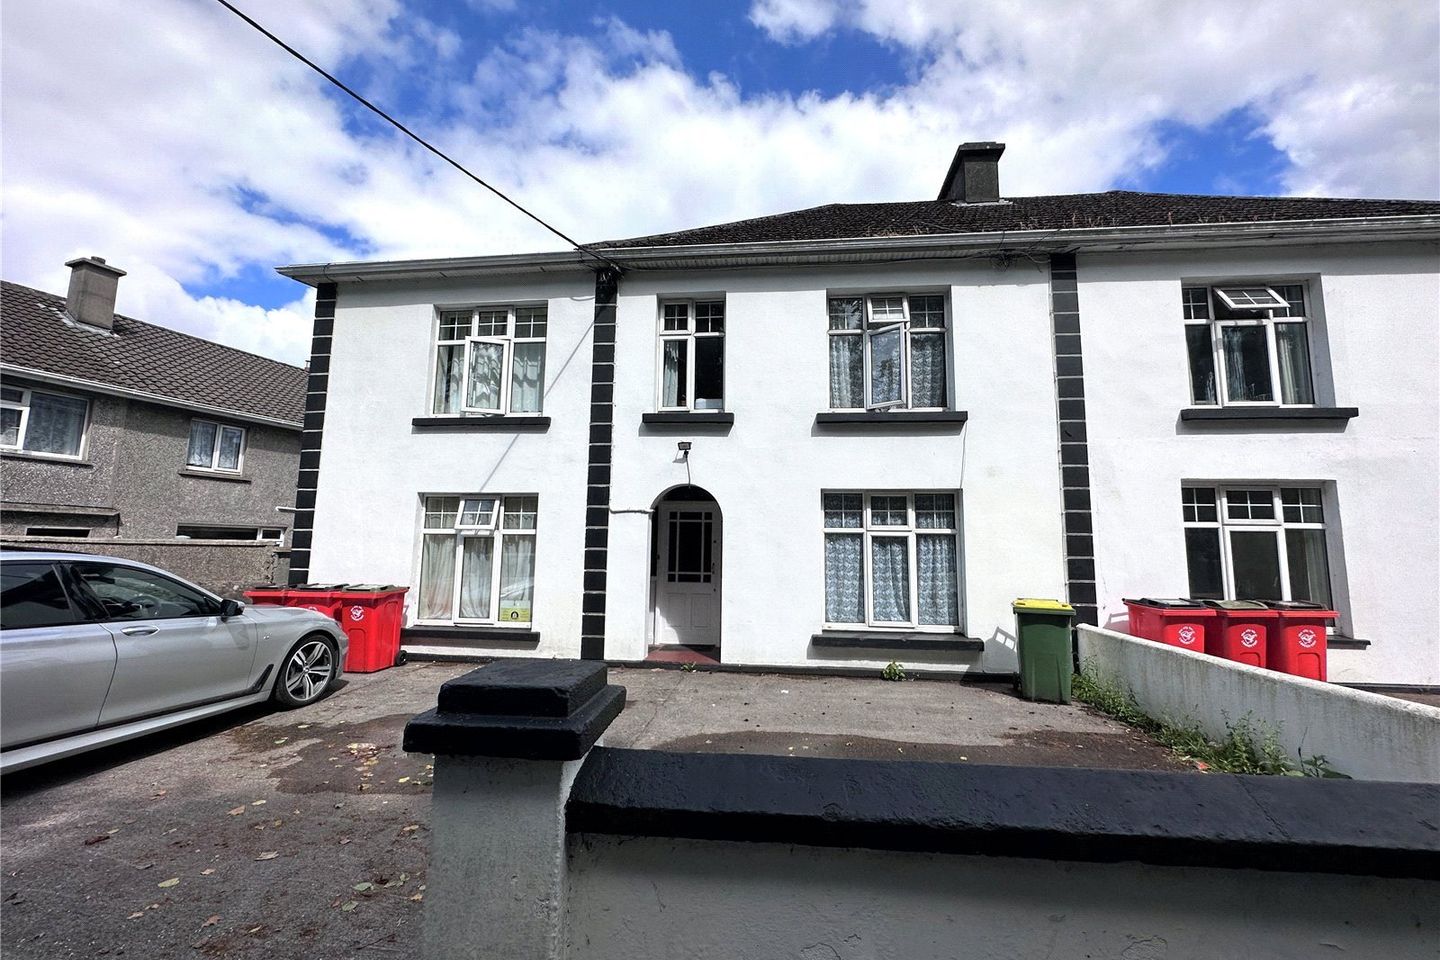 38 Newcastle Road, Newcastle, Co. Galway, H91DT80